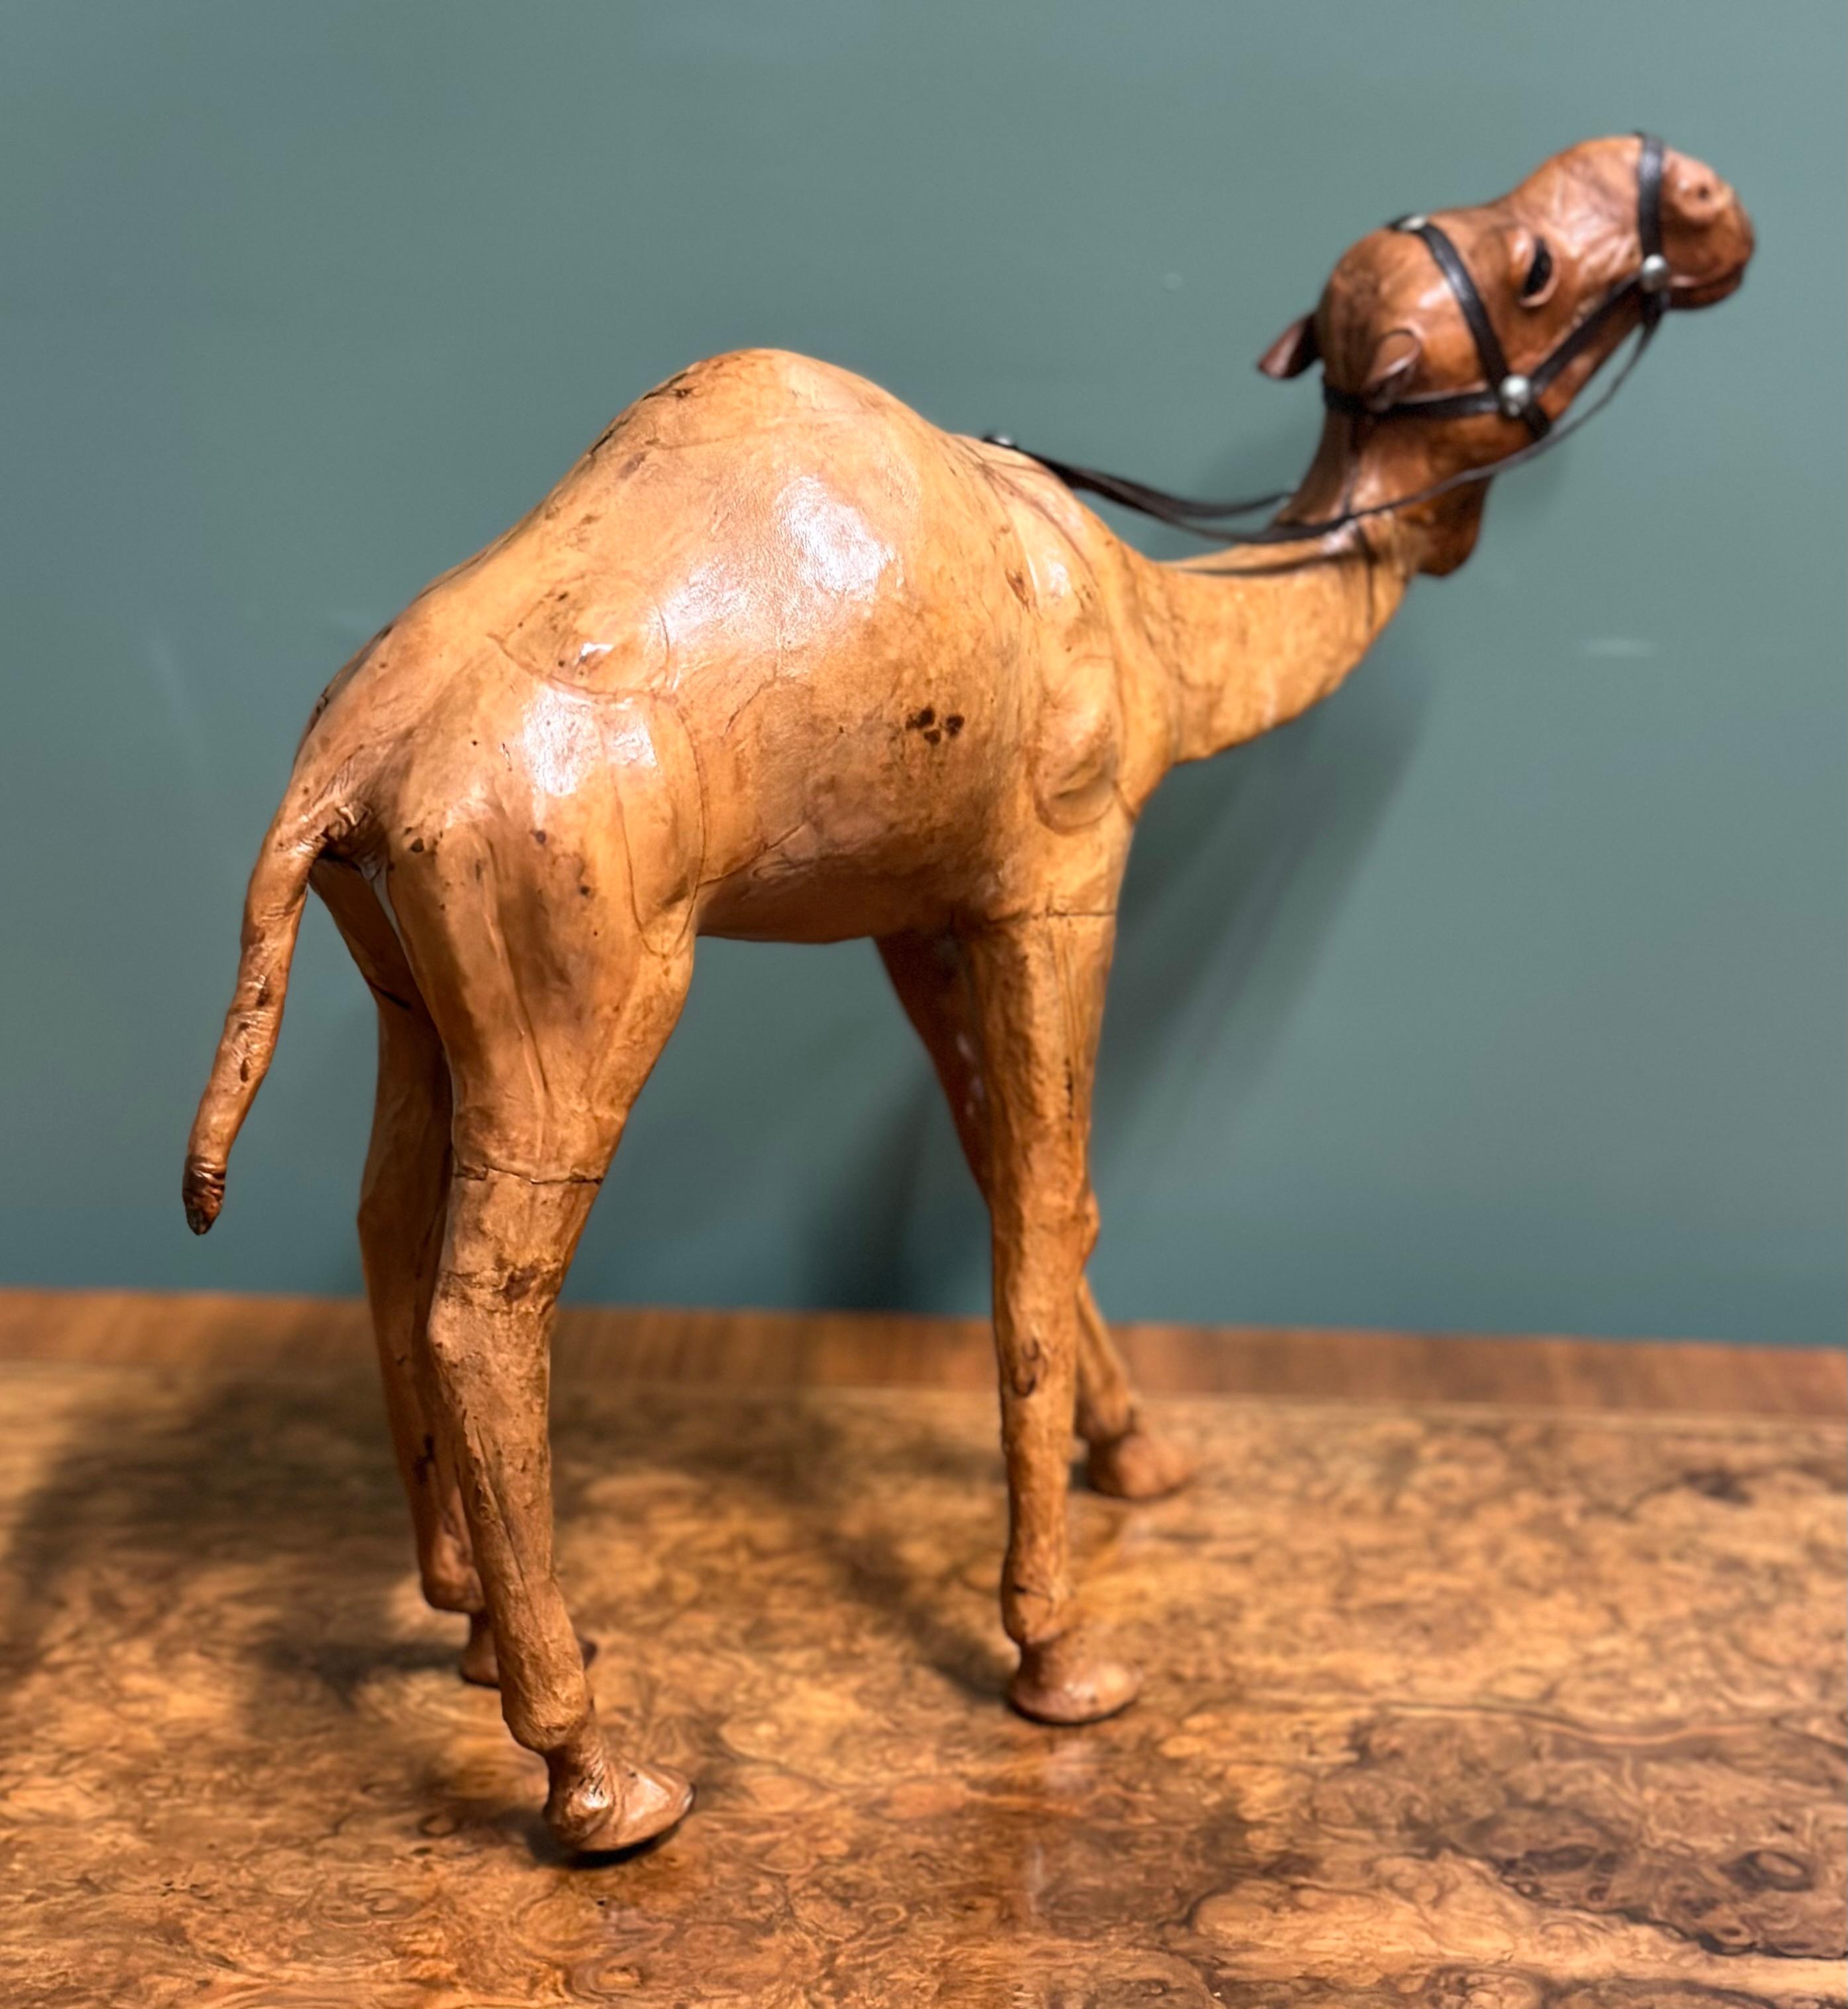 Hand-Crafted Liberty's London Camel Sculpture with Lovely Aged Leather on Hand Carved Wood For Sale